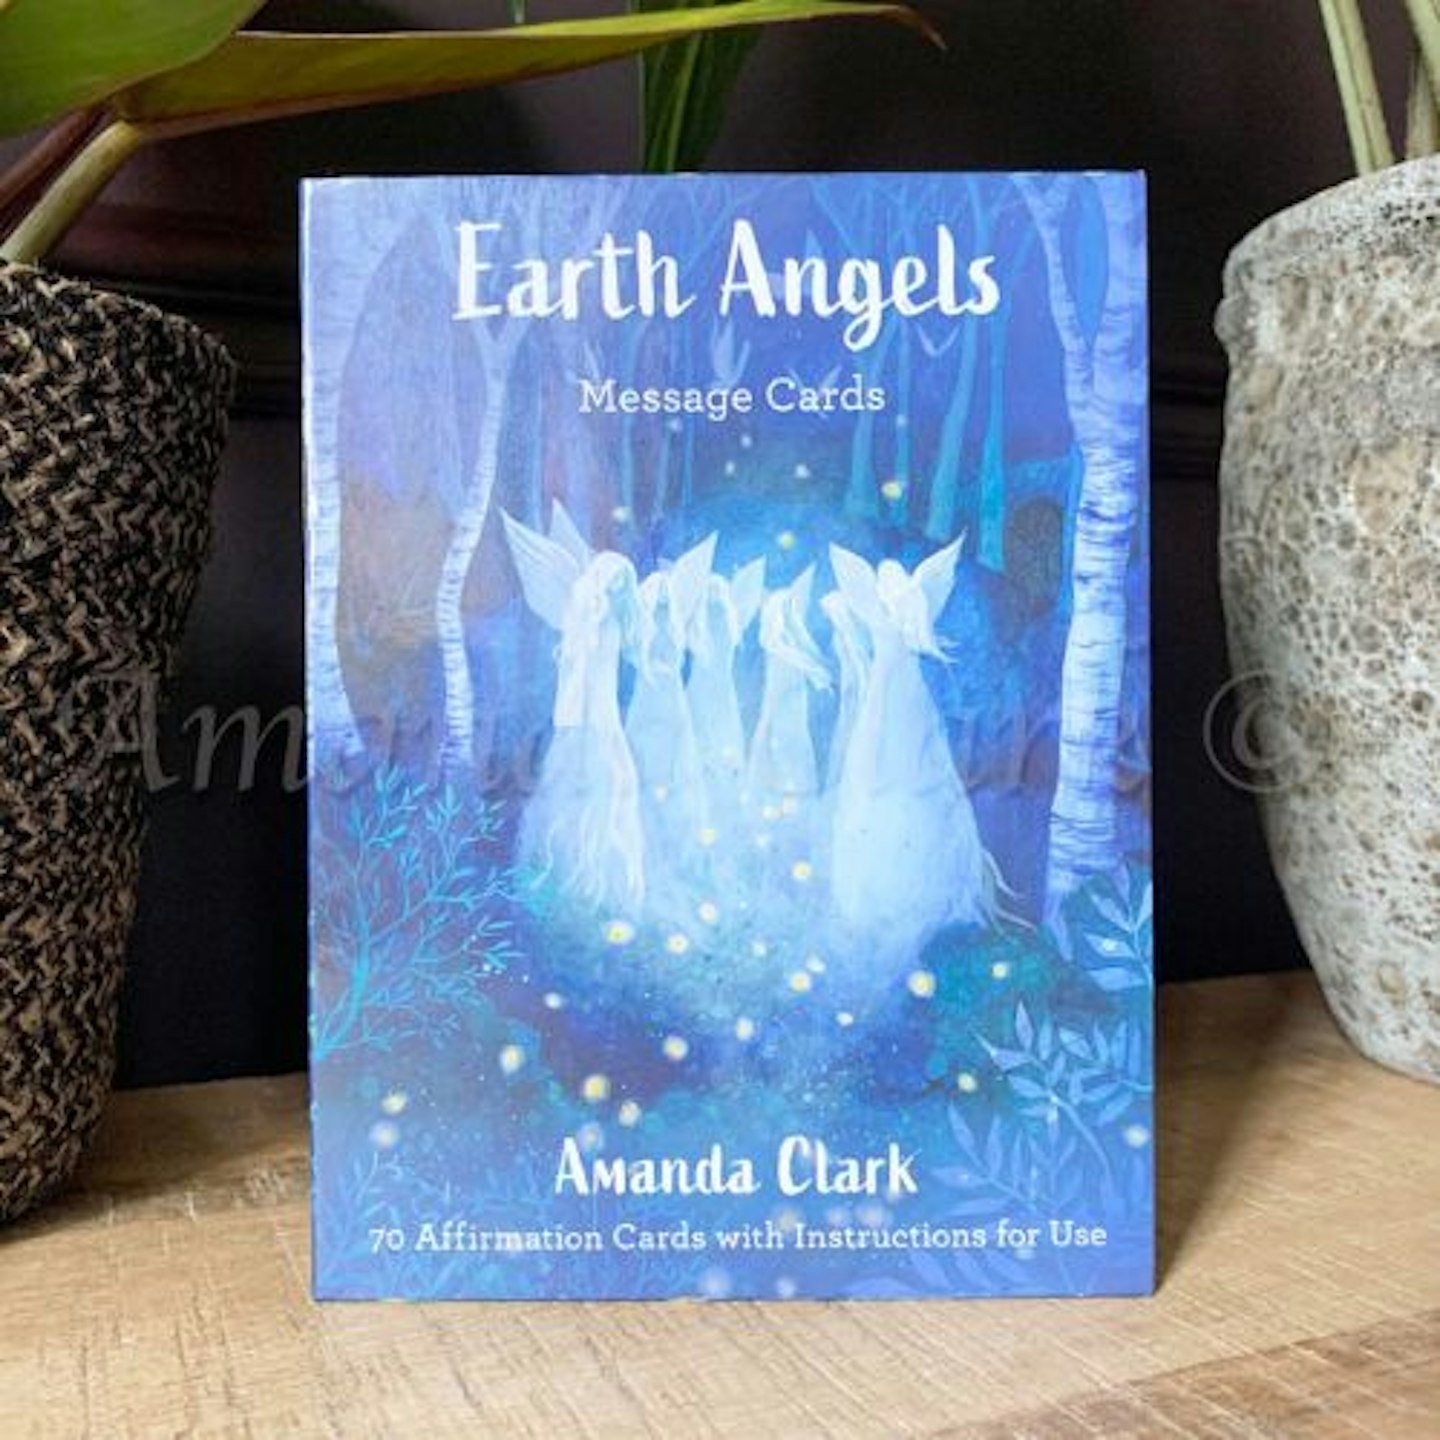 Earth Angels Message Cards by Amanda Clark